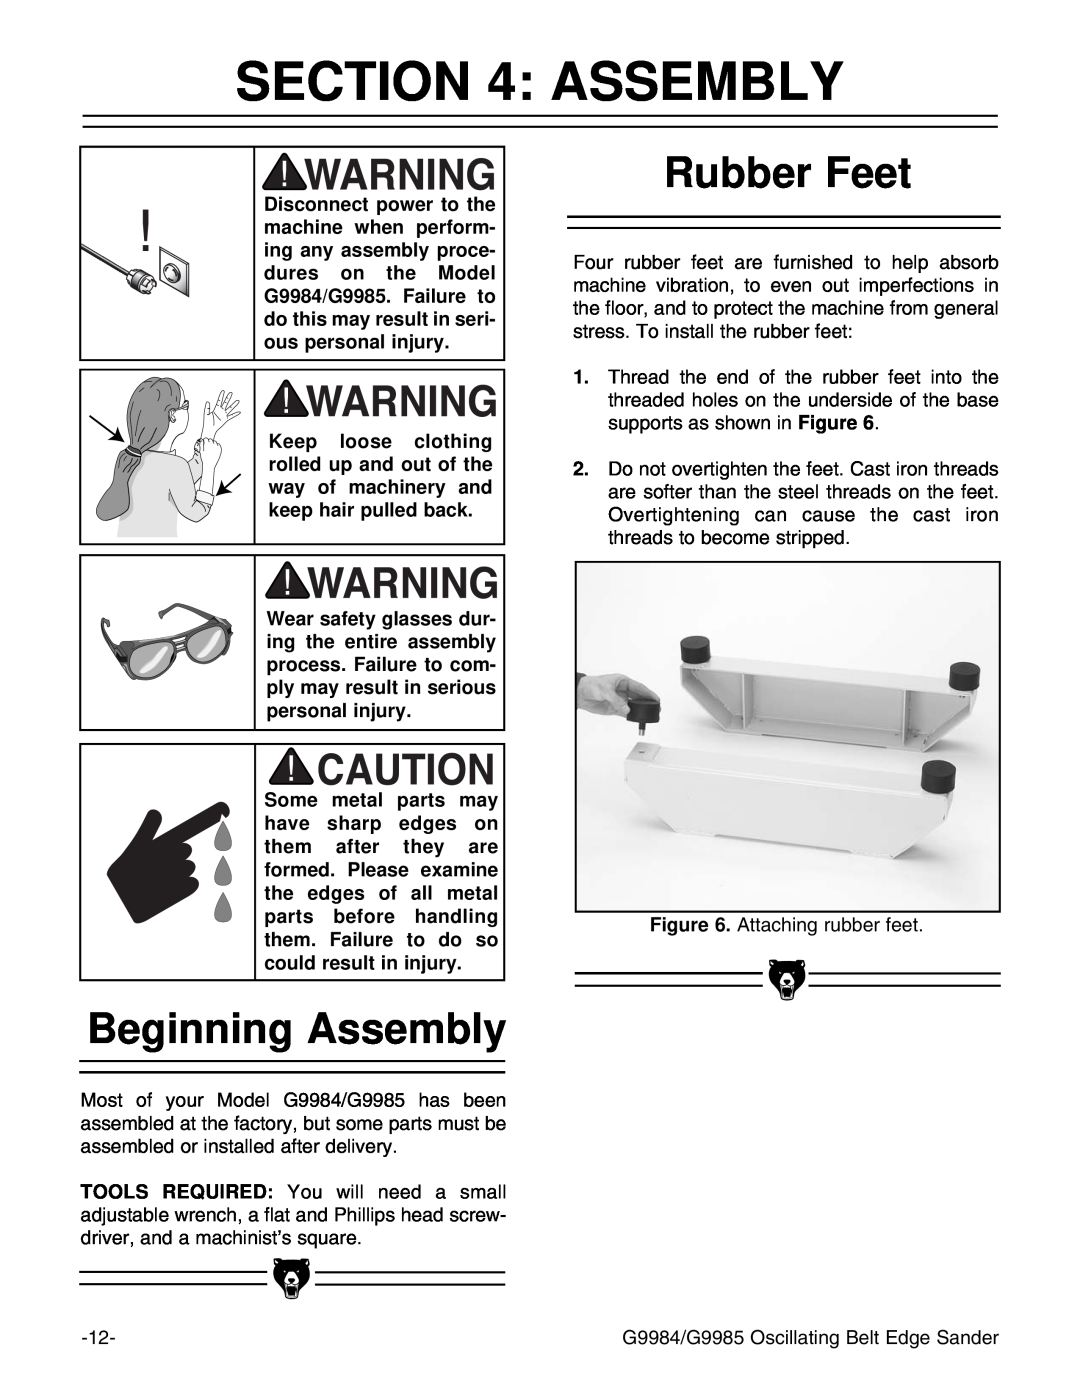 Grizzly G9984, G9985 instruction manual Beginning Assembly, Rubber Feet 